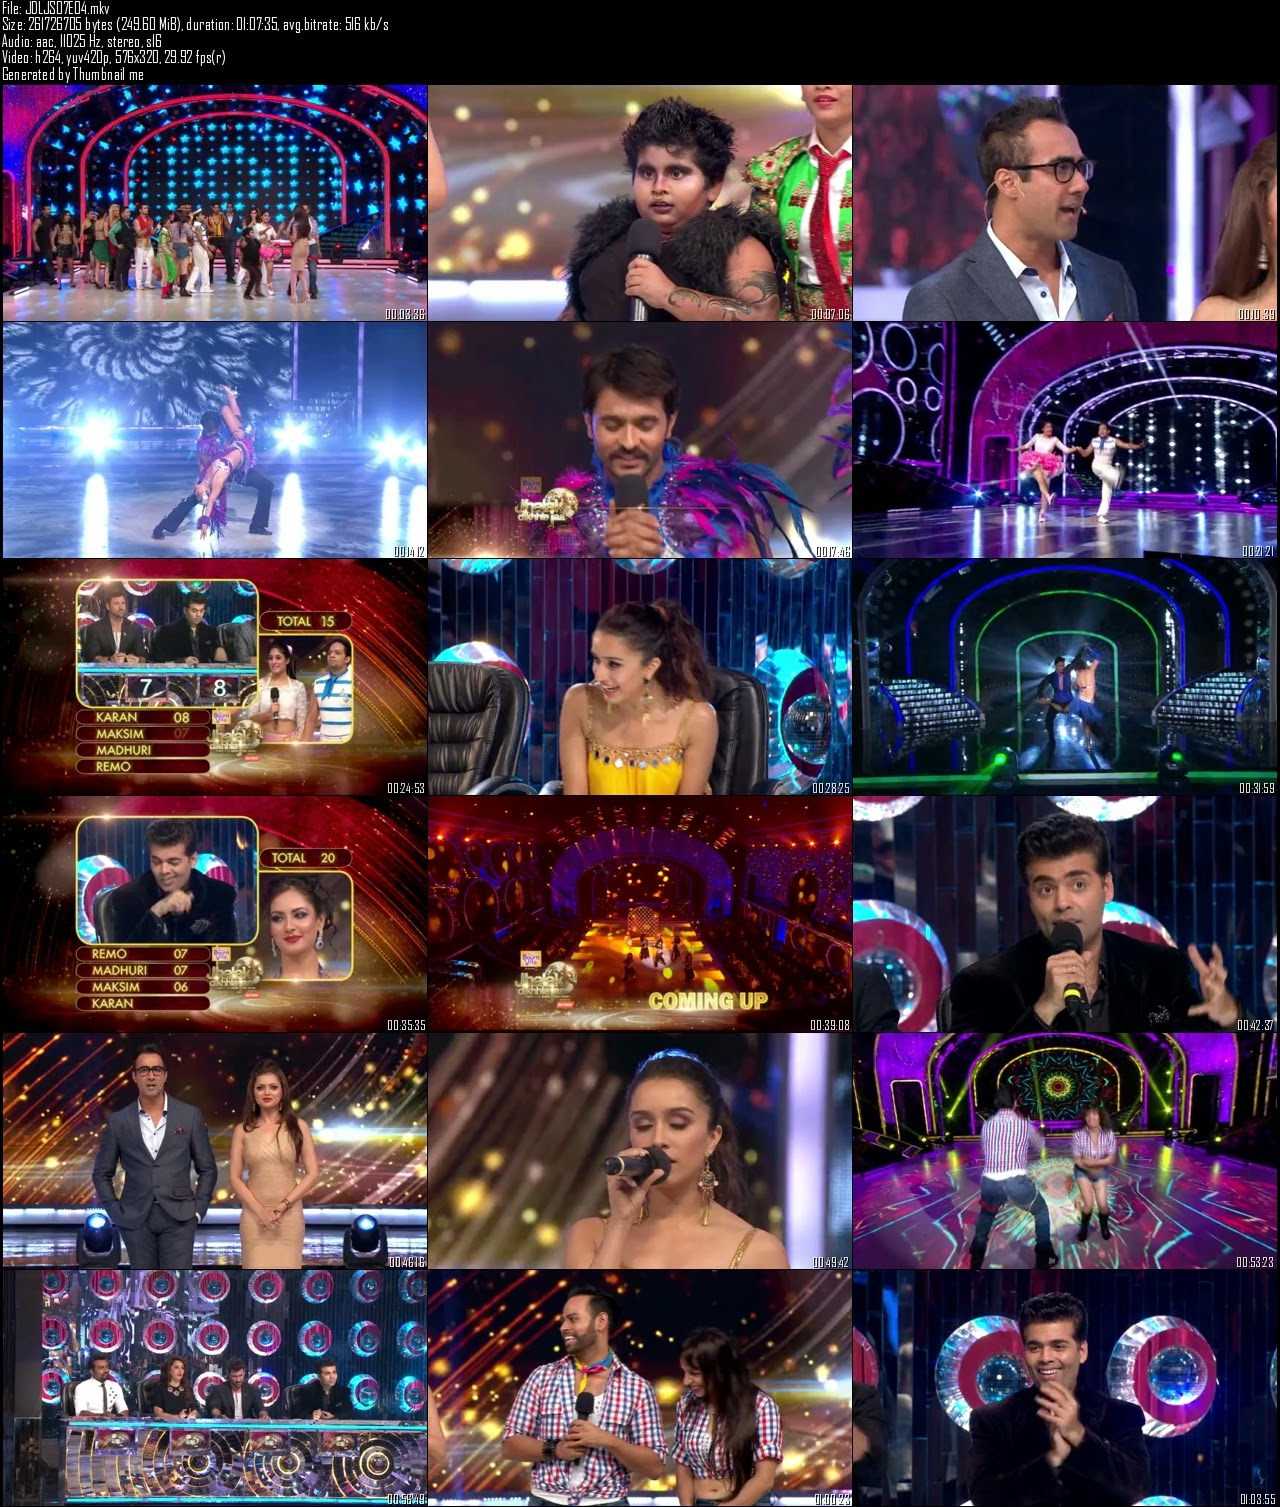 Resumable Mediafire Download Link For Hindi Show Jhalak Dikhla Jaa Season 7 (2014) 15th June 2014 Watch Online Download